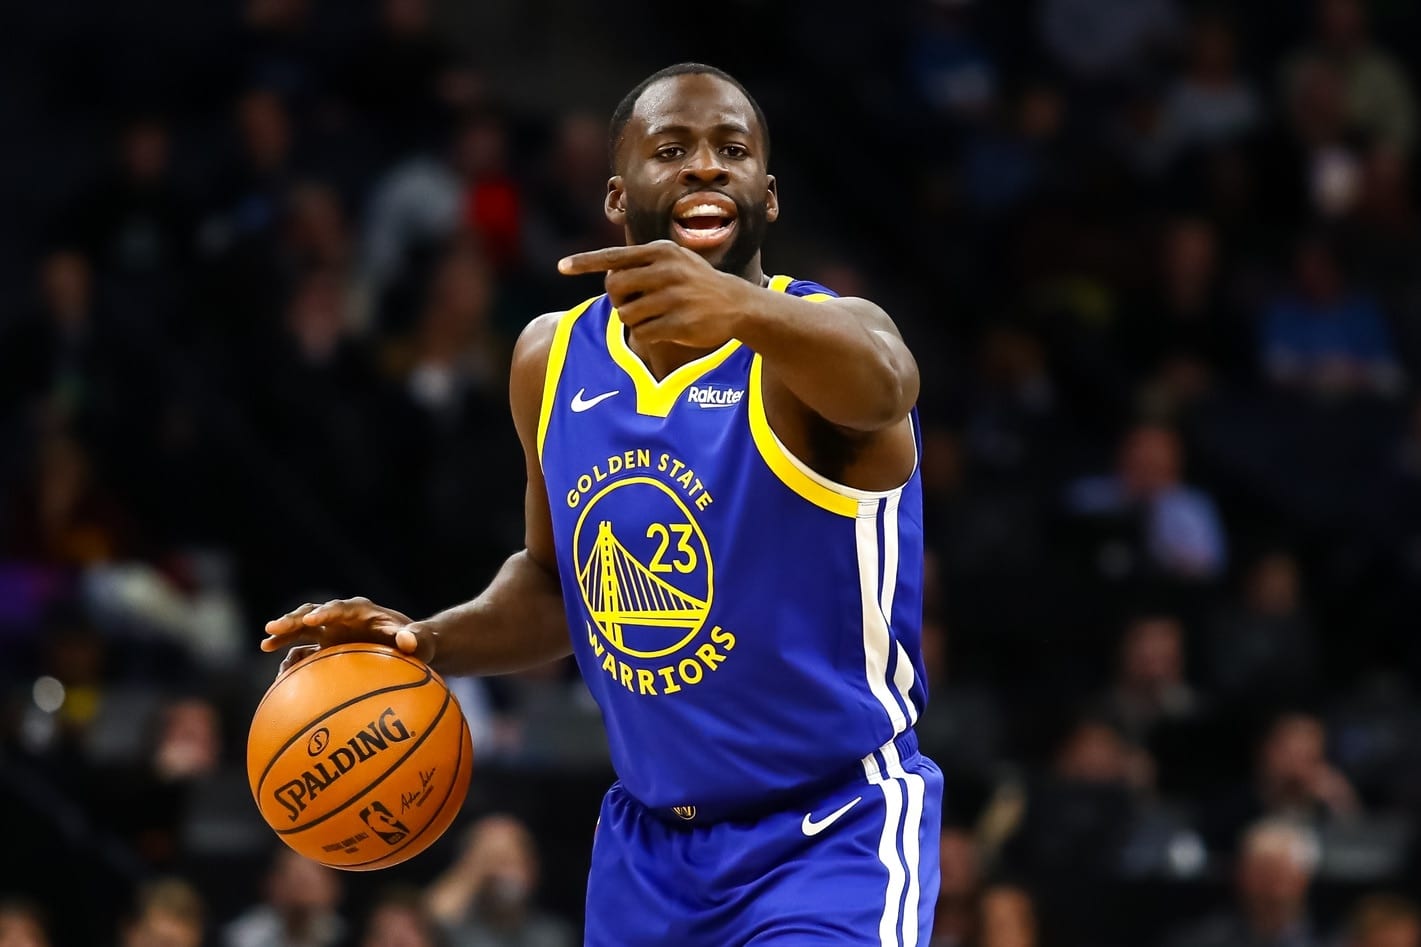 Draymond Green Says He Was ‘Dead Ass Wrong’ on Ejection